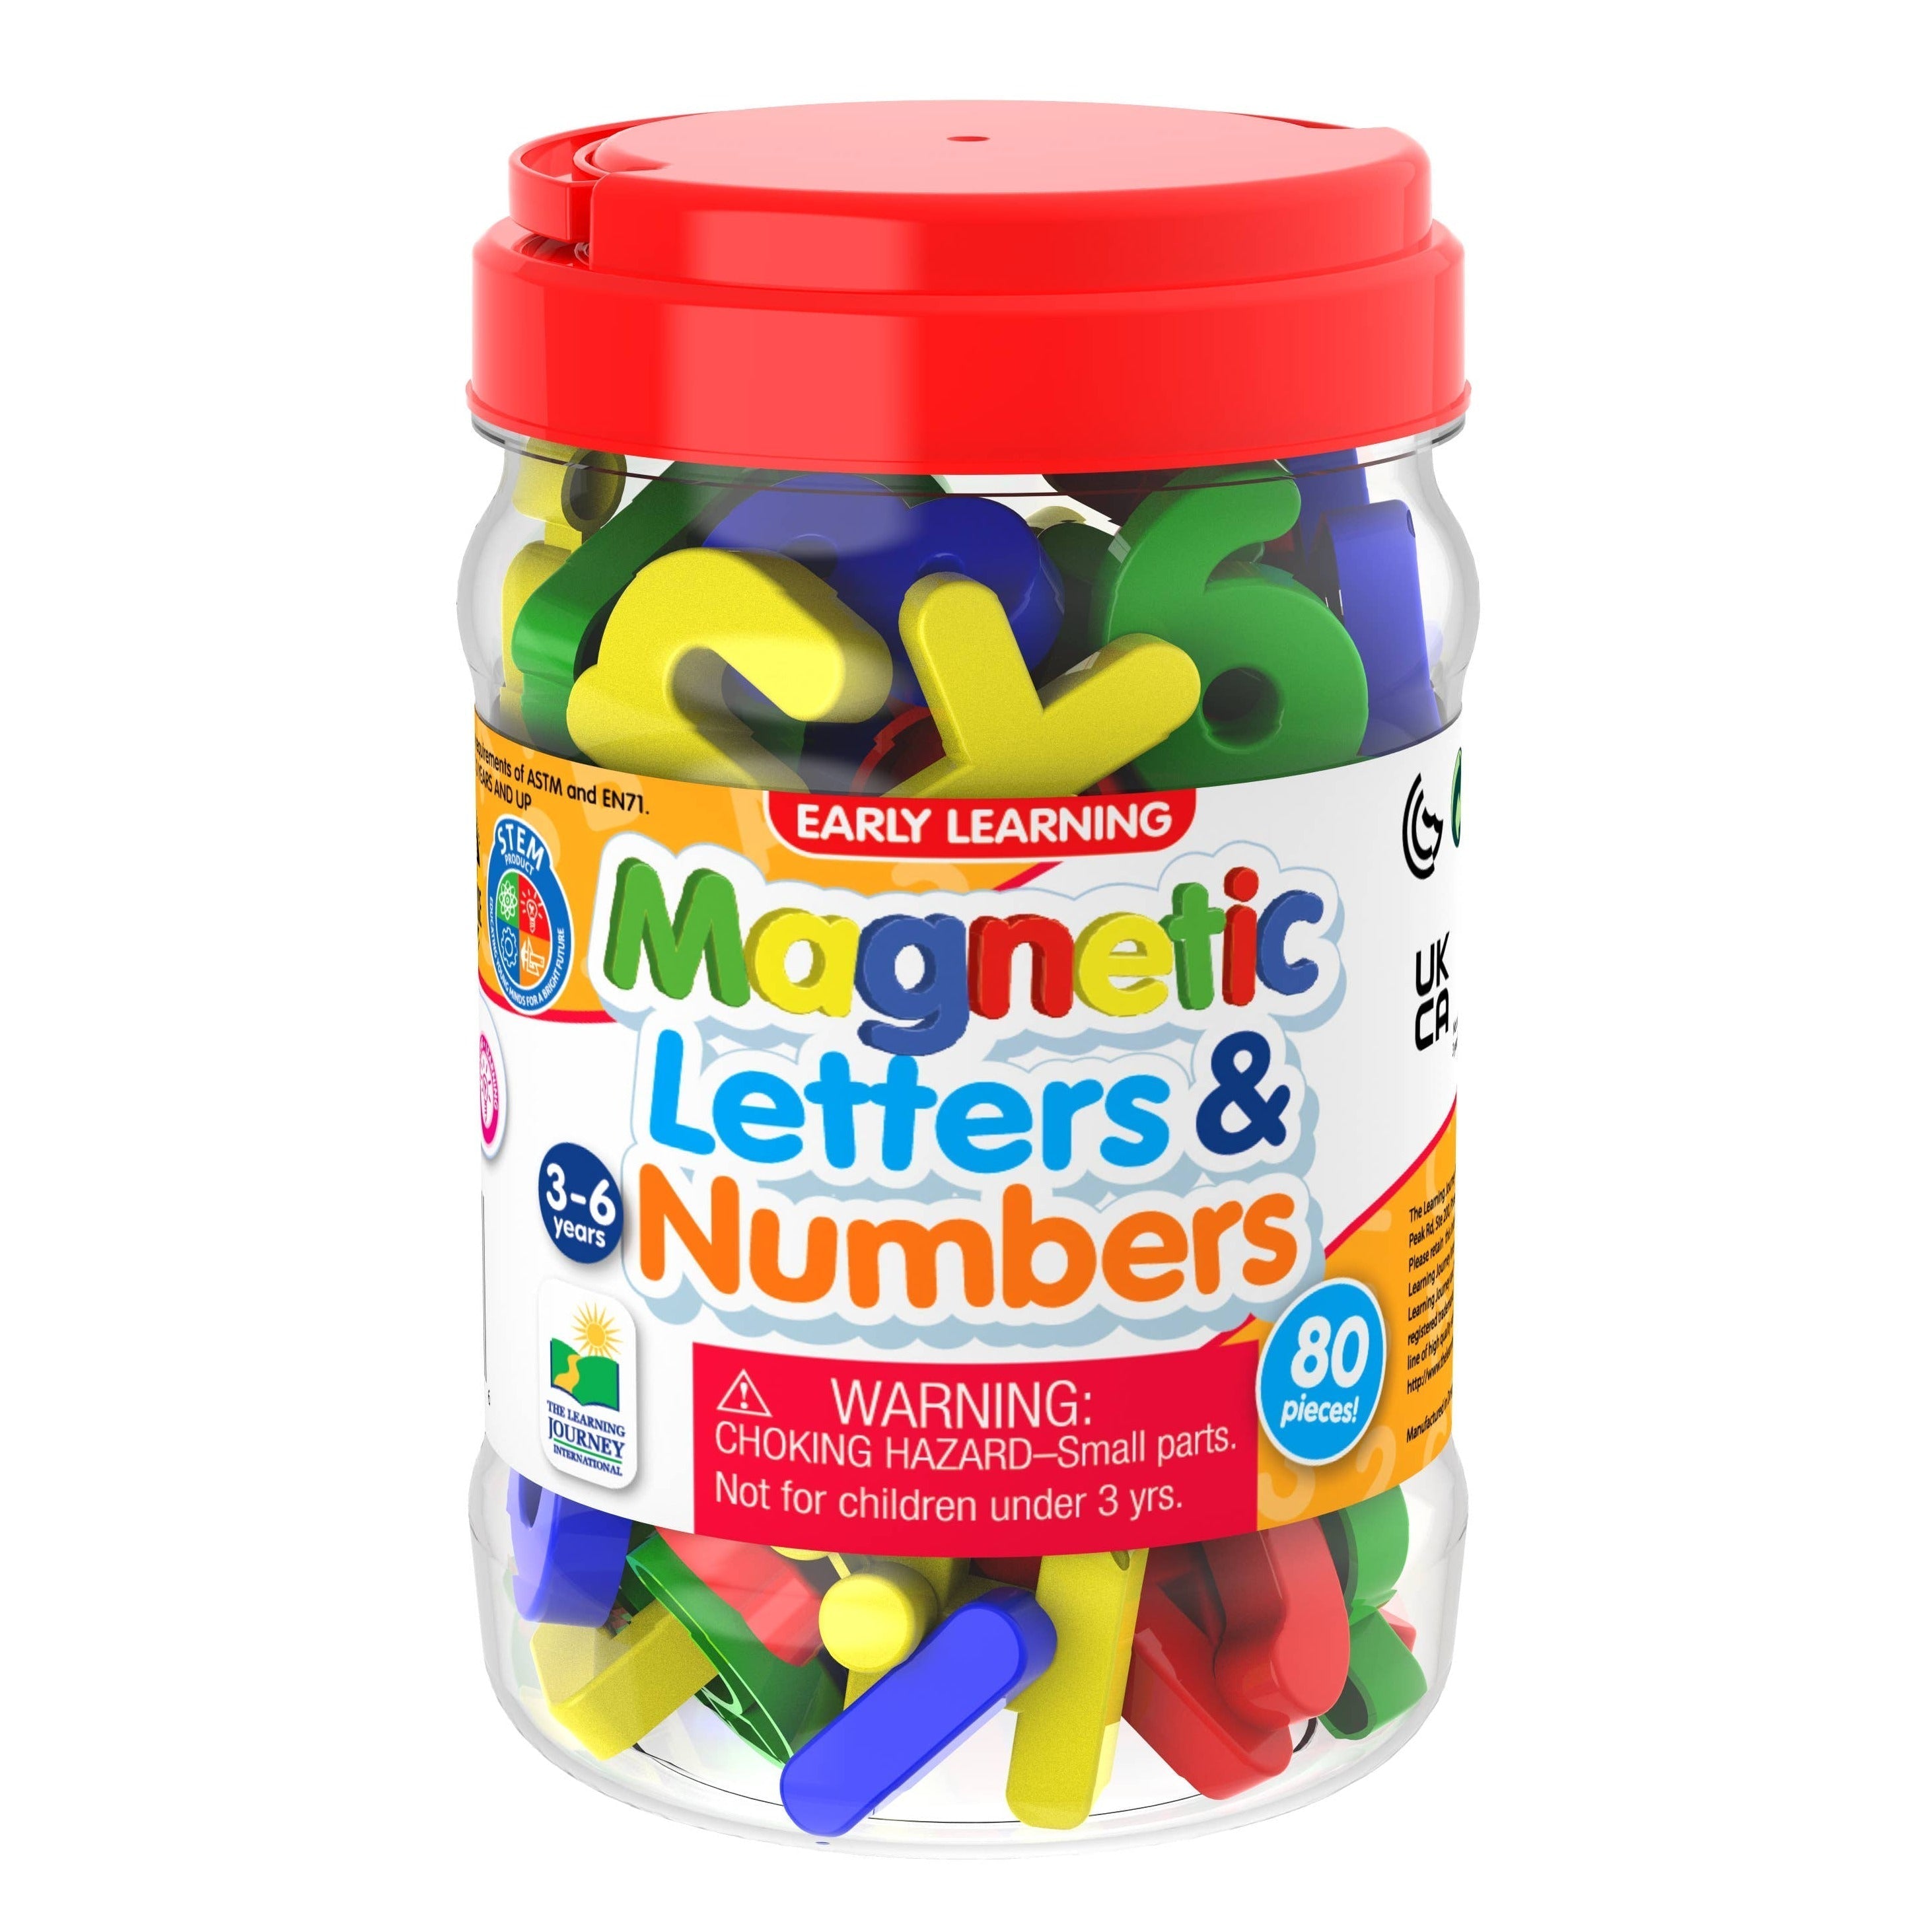 Magnetic Letters & Numbers, The Magnetic Letters & Numbers set is designed to make learning the alphabet and numbers a fun and interactive experience for your little ones. This jug full of letters and numbers offers endless possibilities for learning and creative play. Magnetic Letters & Numbers Features: Alphabet and Number Mastery: This set is a fantastic resource for helping young learners master their alphabet and number skills. It provides both upper and lower-case alphabet letters, including two sets 